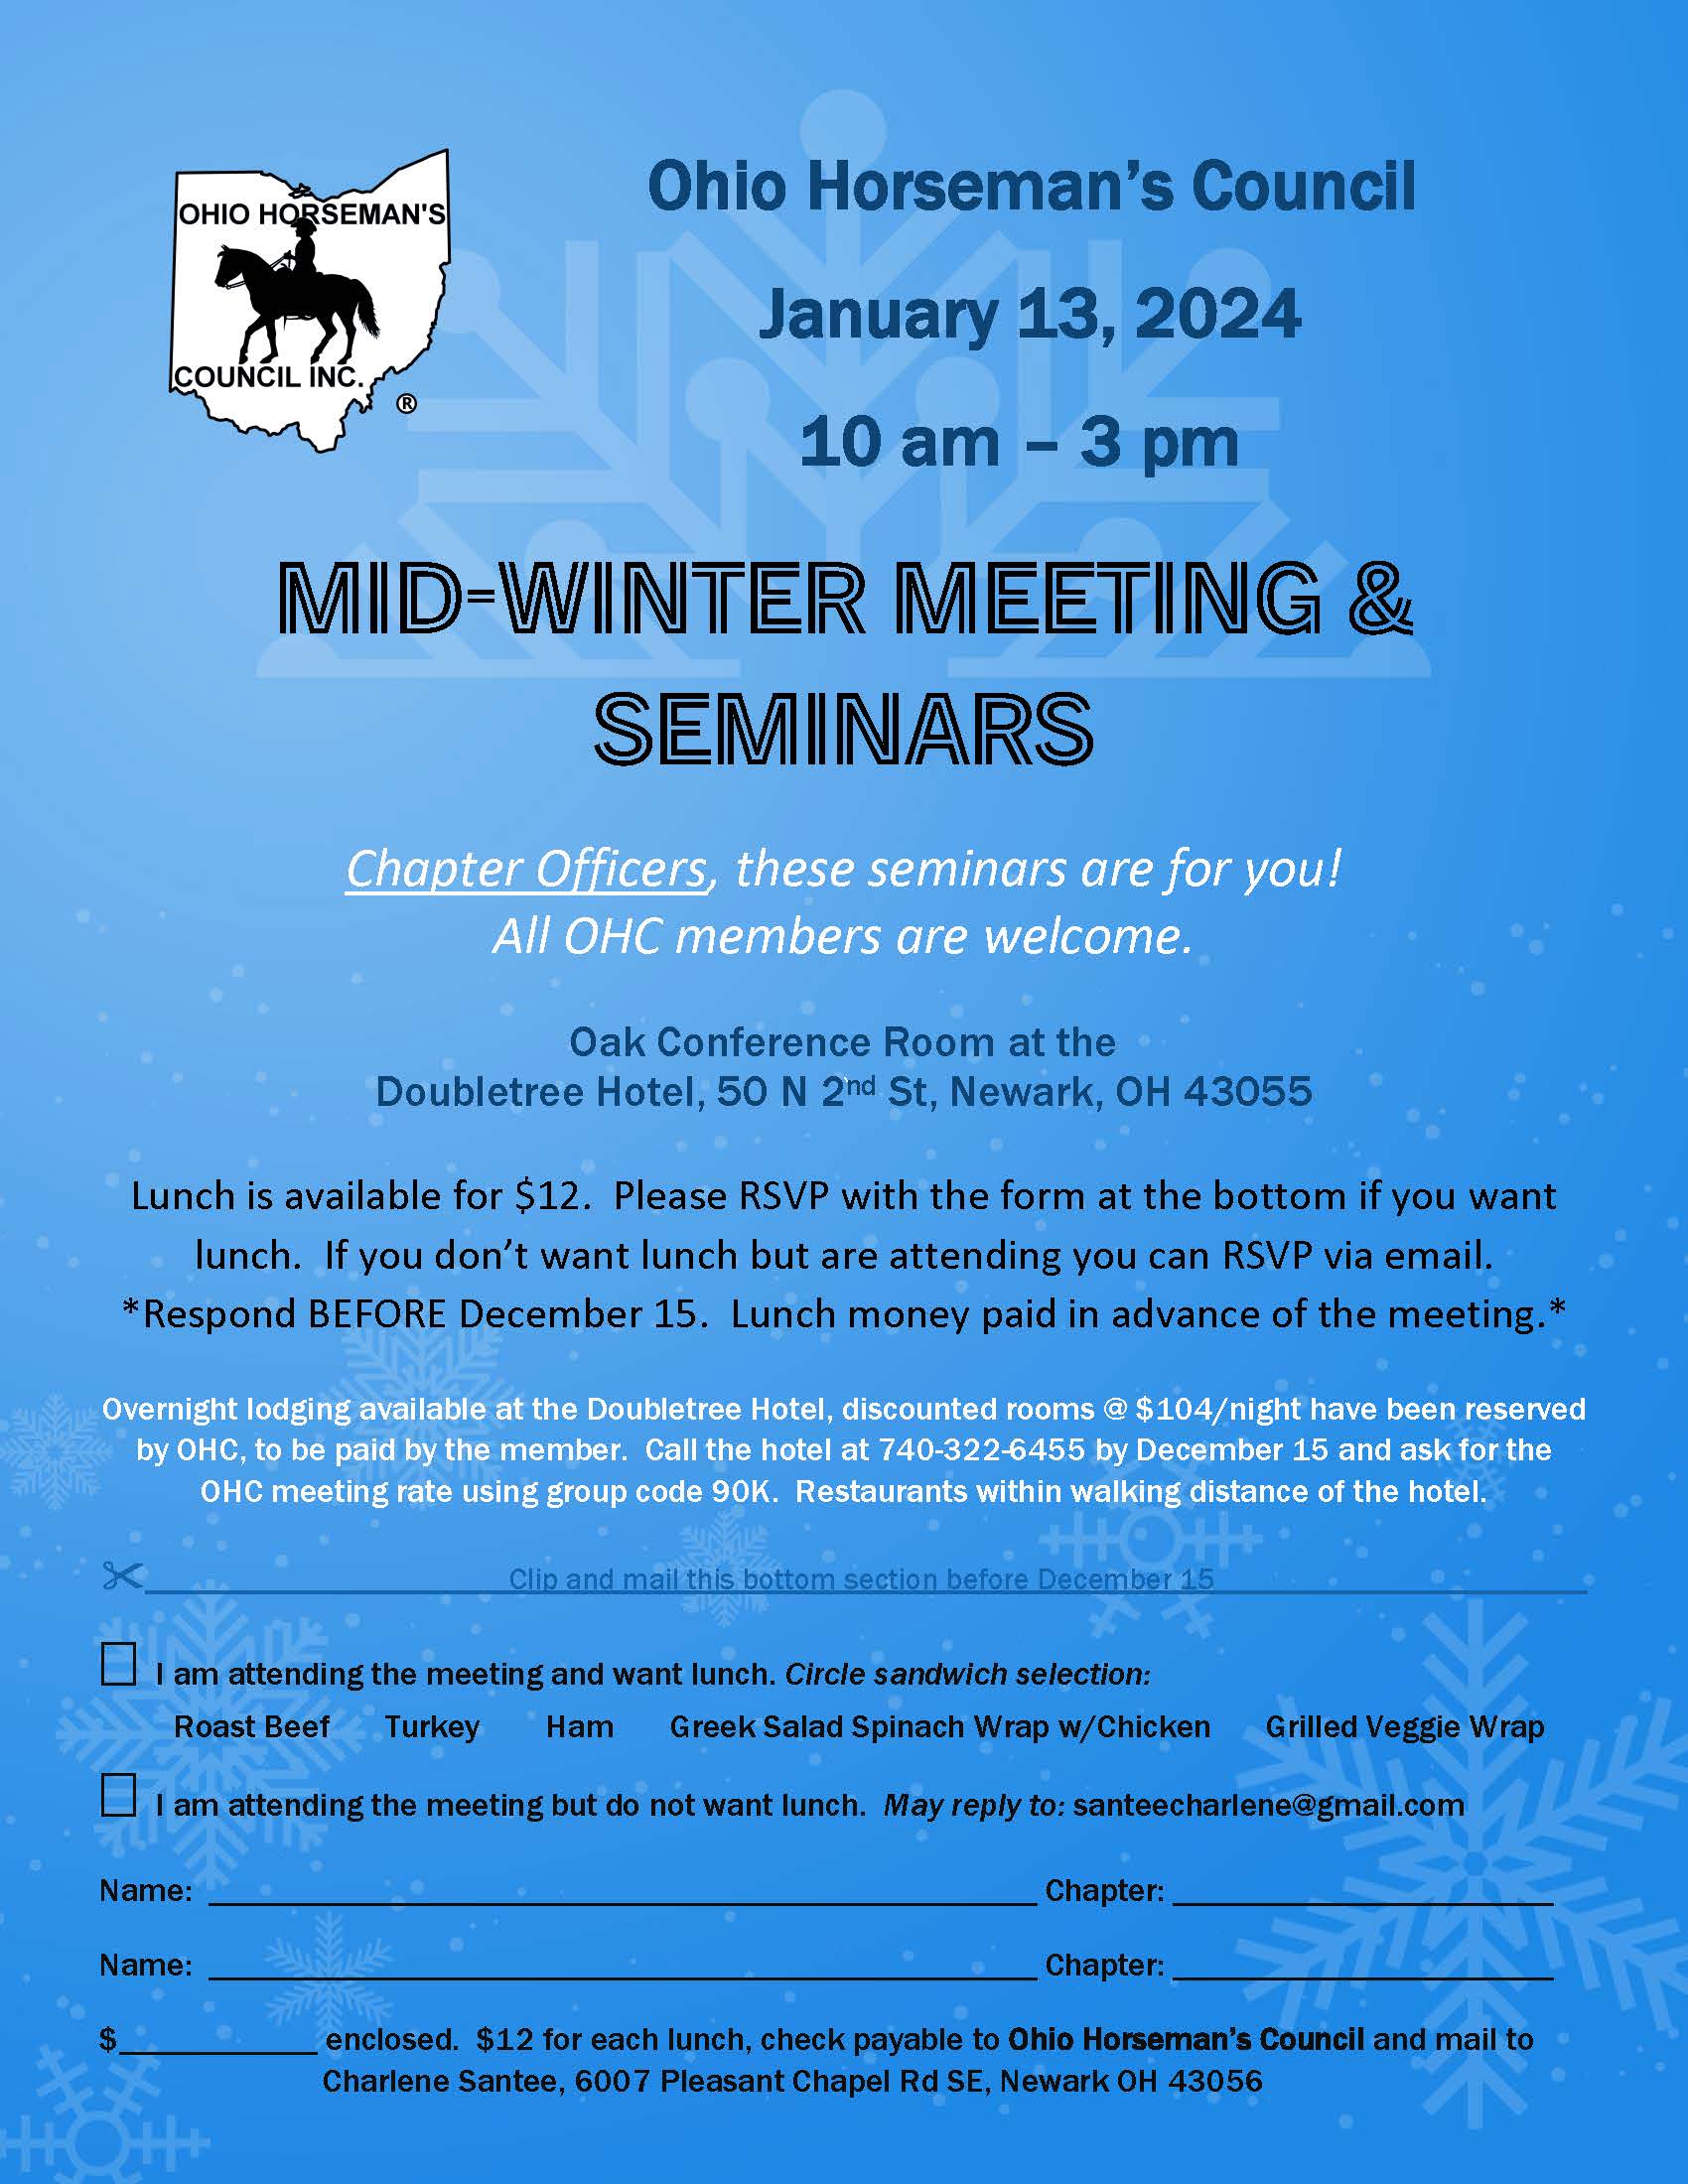 Mid-Winter Meeting & Seminars for Chapters – January 13, 2024